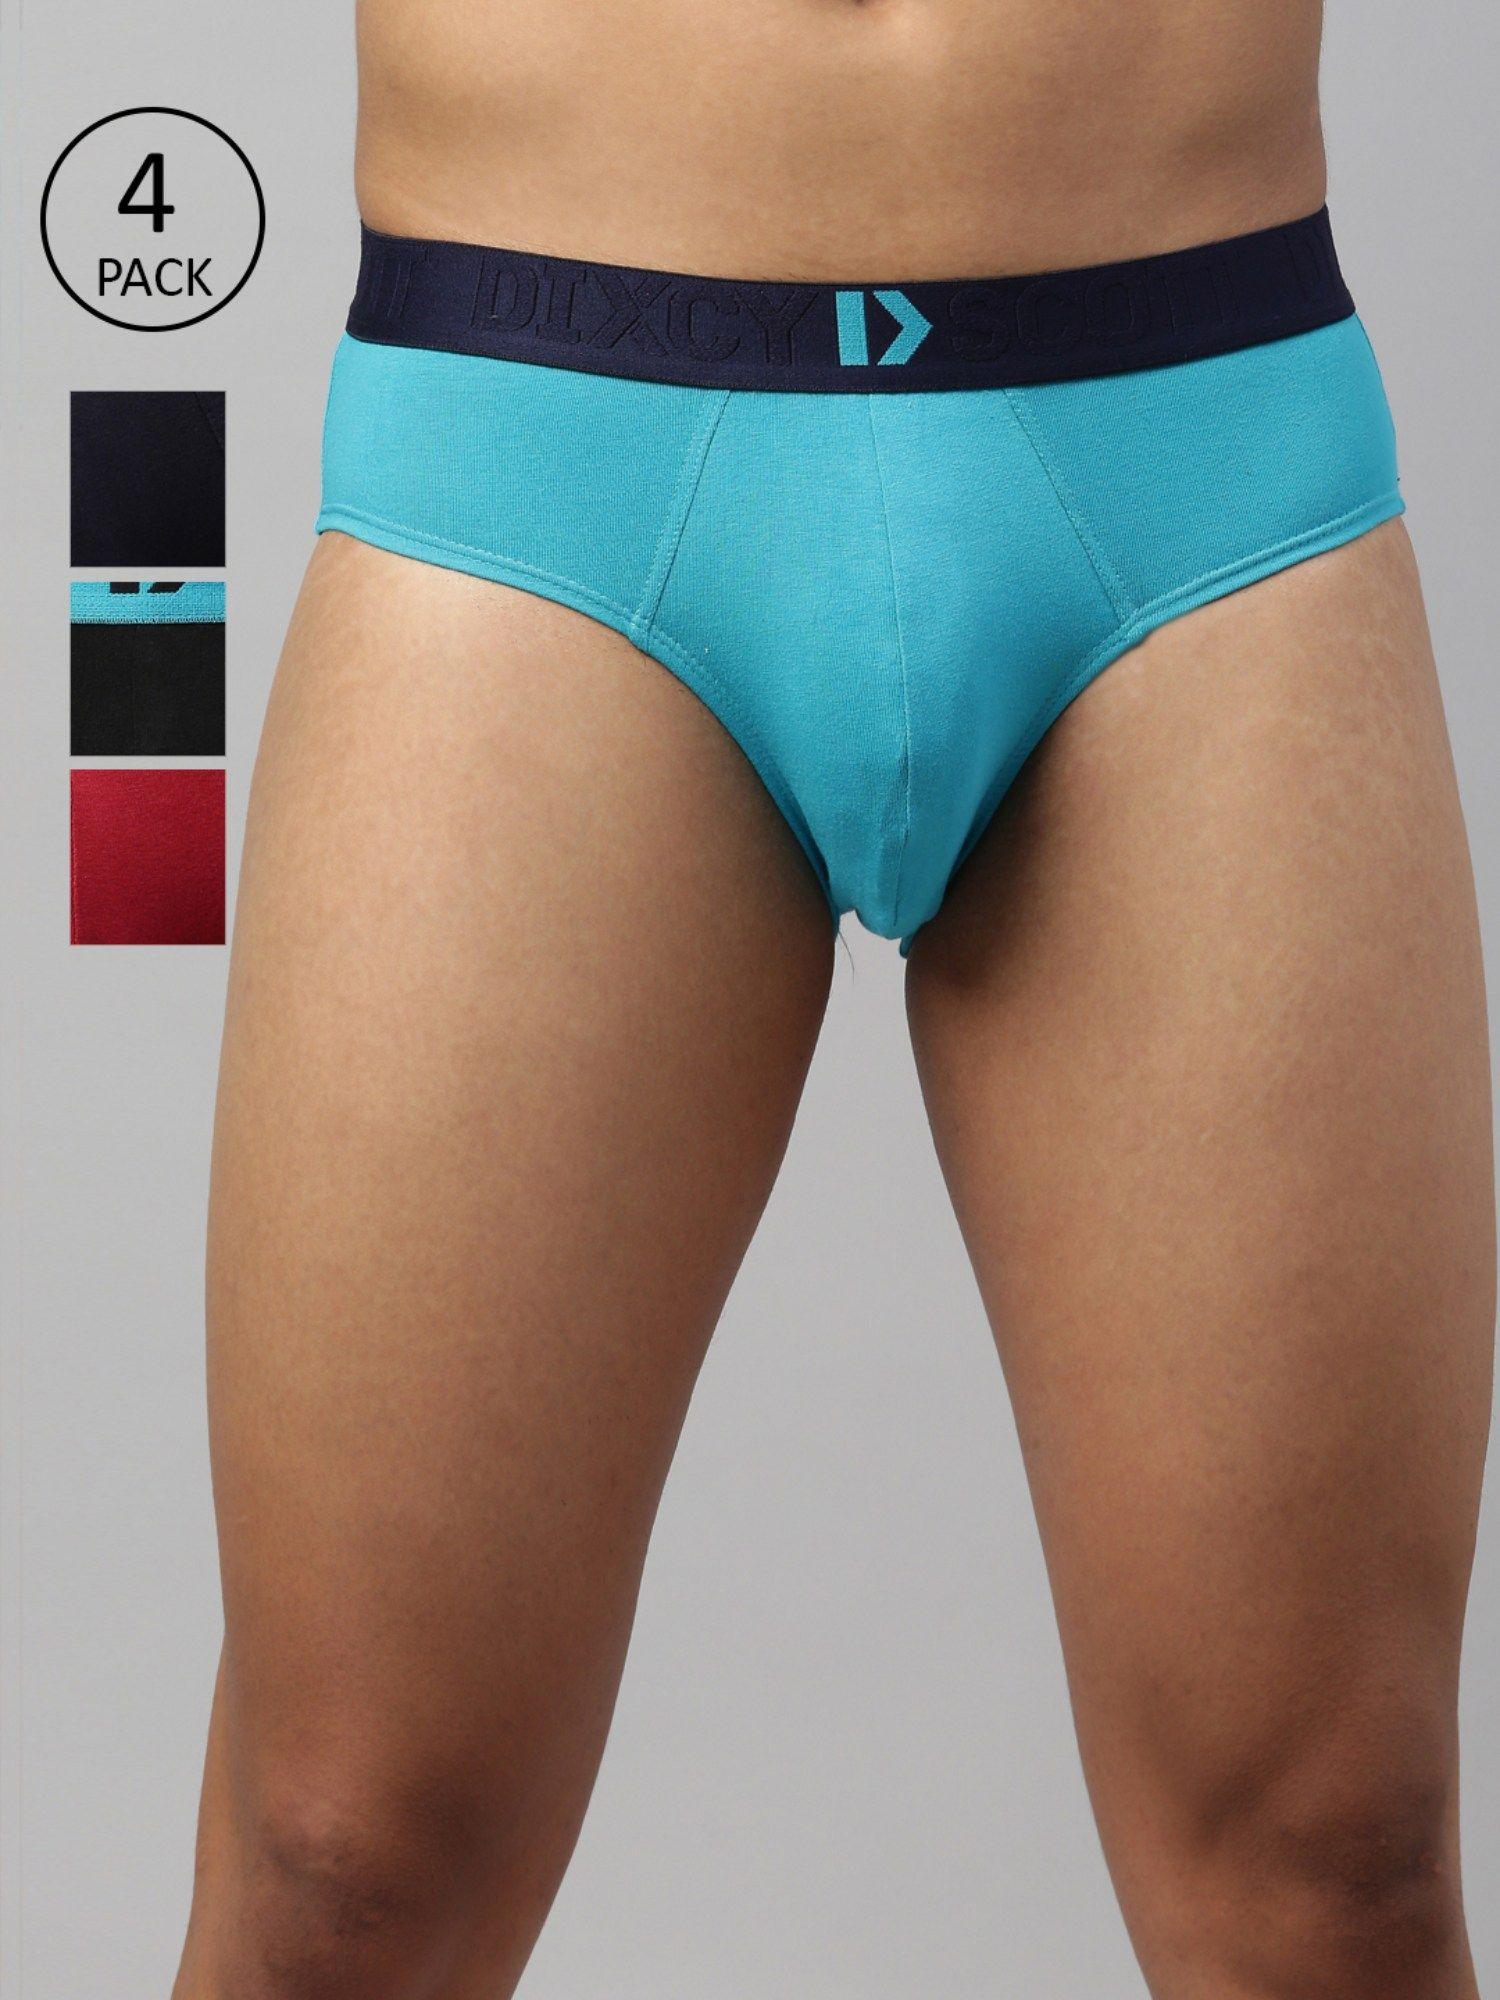 mens cotton spandex with anti microbial finish brief - multicolor (pack of 4)